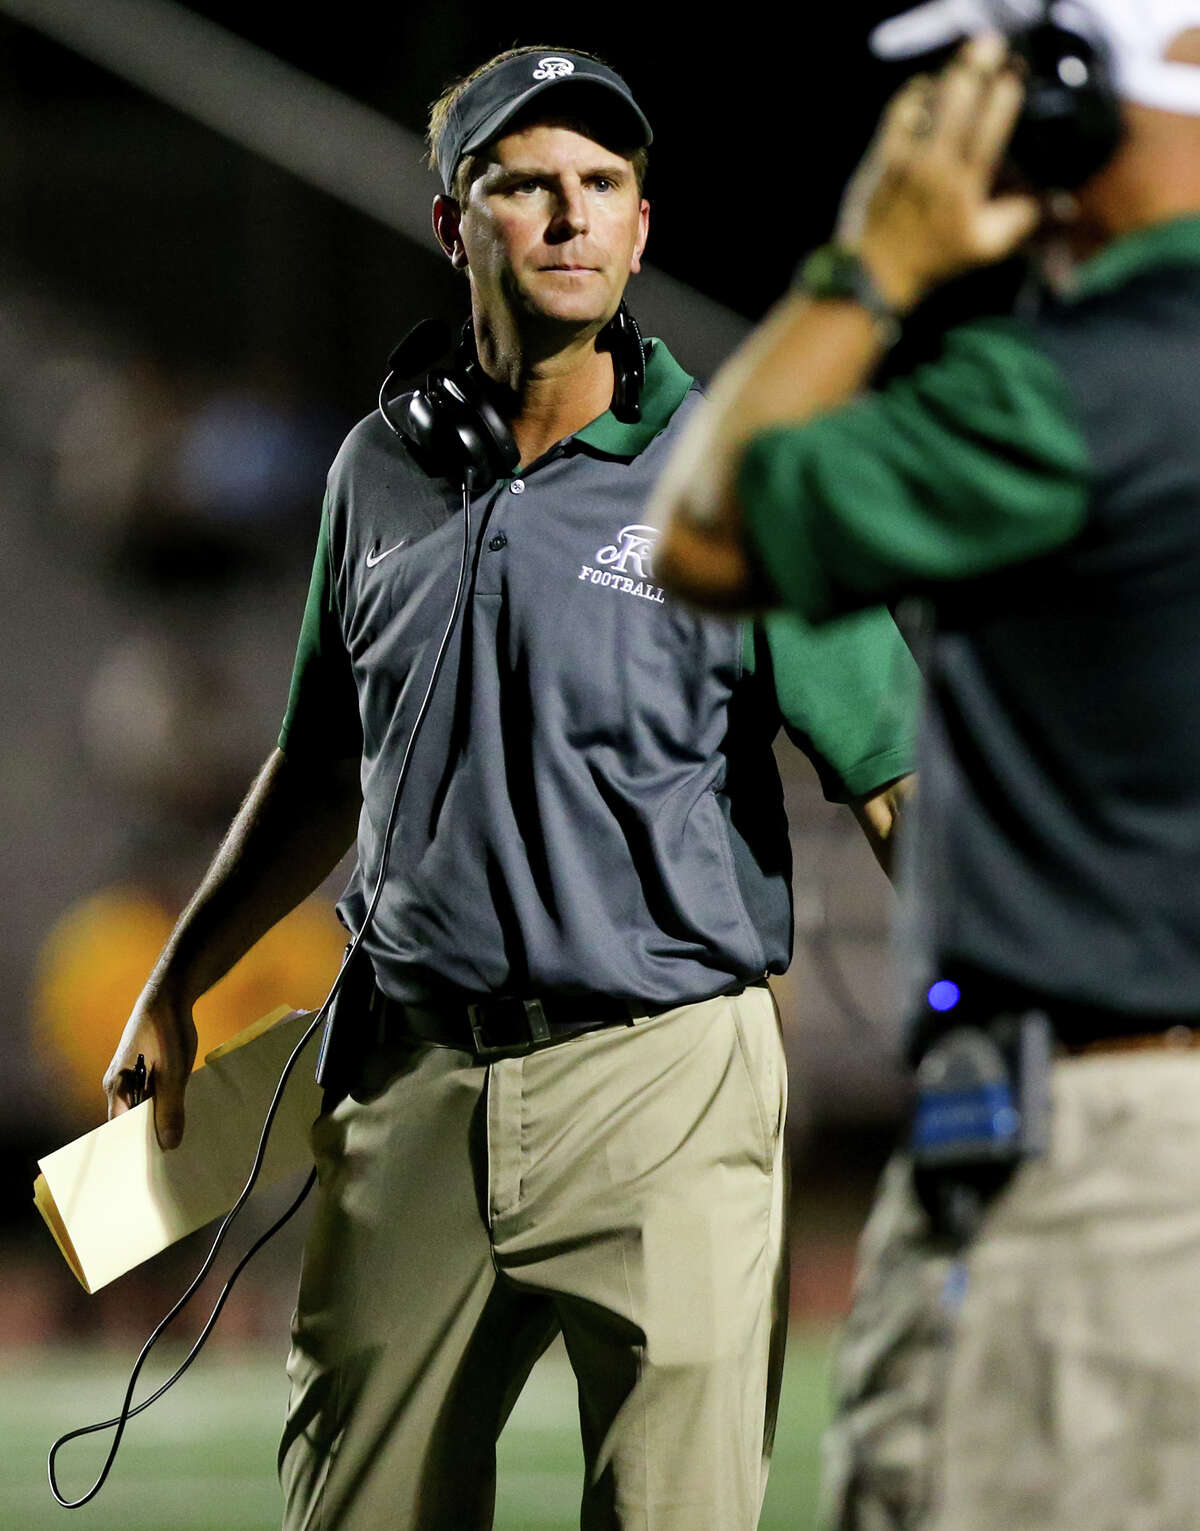 Reagan coach David Wetzel on the sideline during the second half of their game with East Central at Comalander Stadium on Saturday, Sept. 19, 2015.